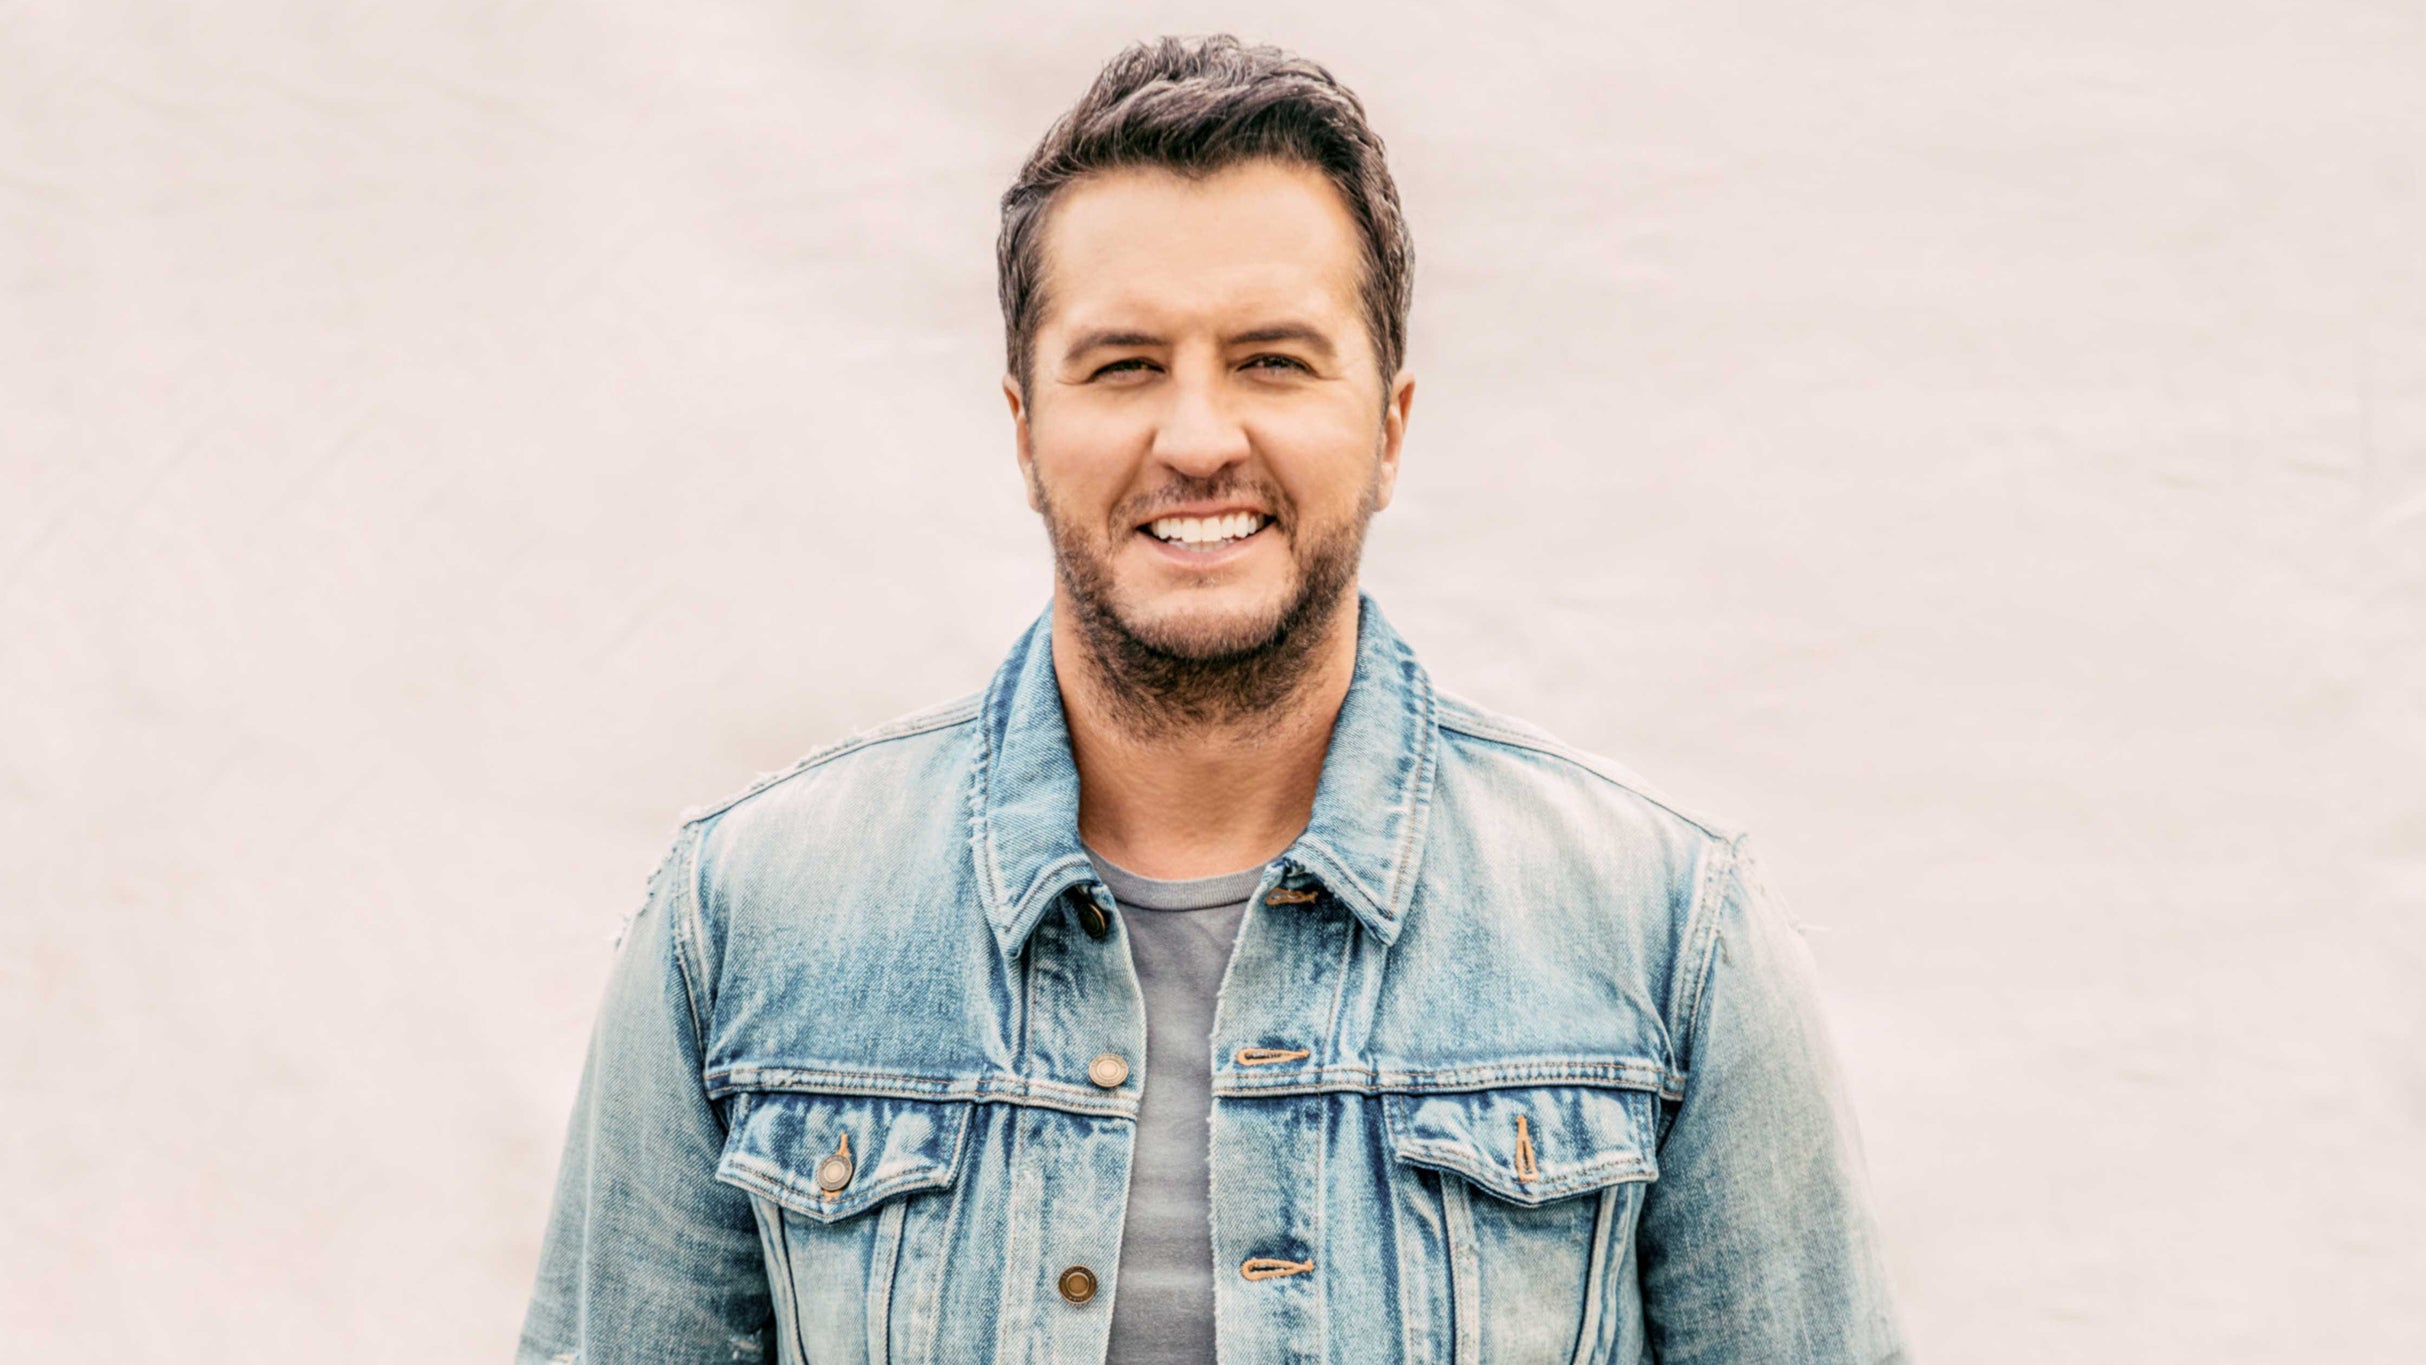 Luke Bryan: Country On Tour 2023 presale code for show tickets in Fort Worth, TX (Dickies Arena)